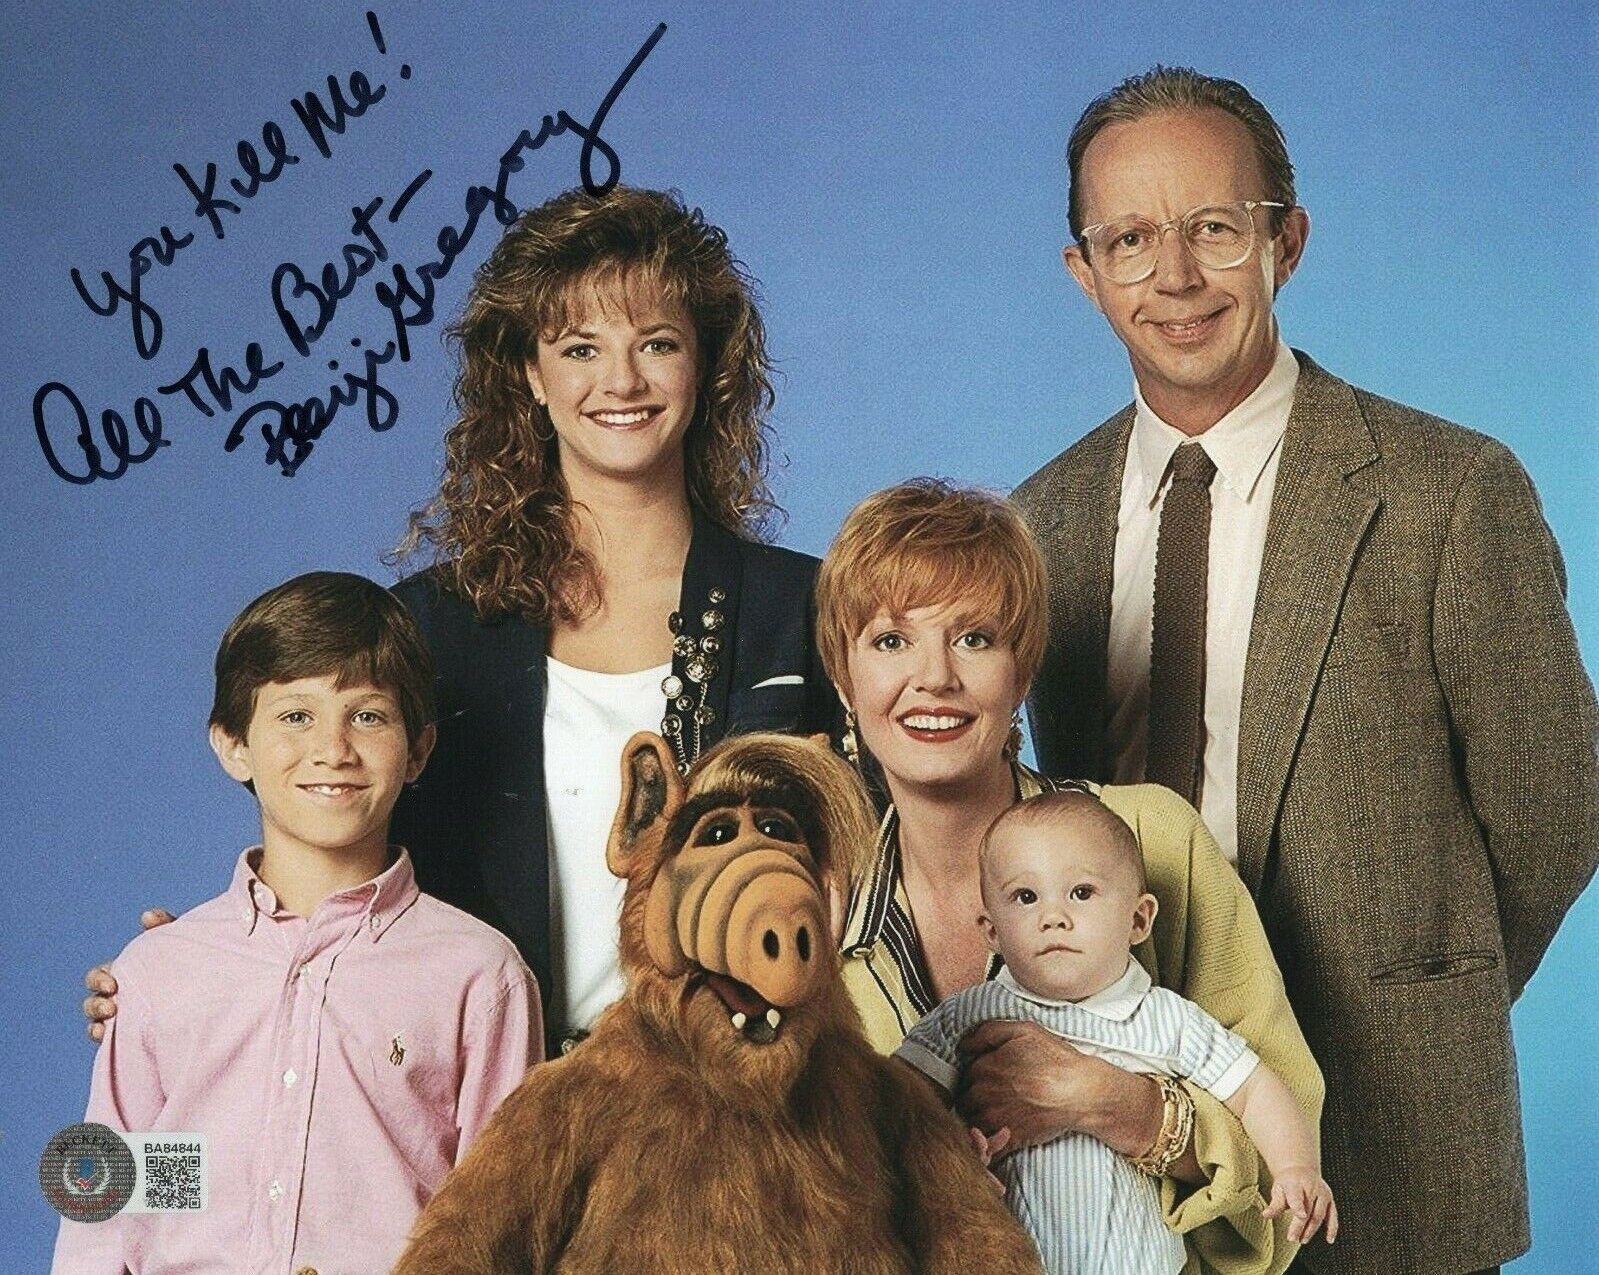 Benji Gregory Signed ALF Brian Tanner 8x10 Photo Poster painting w/Beckett COA BA84844